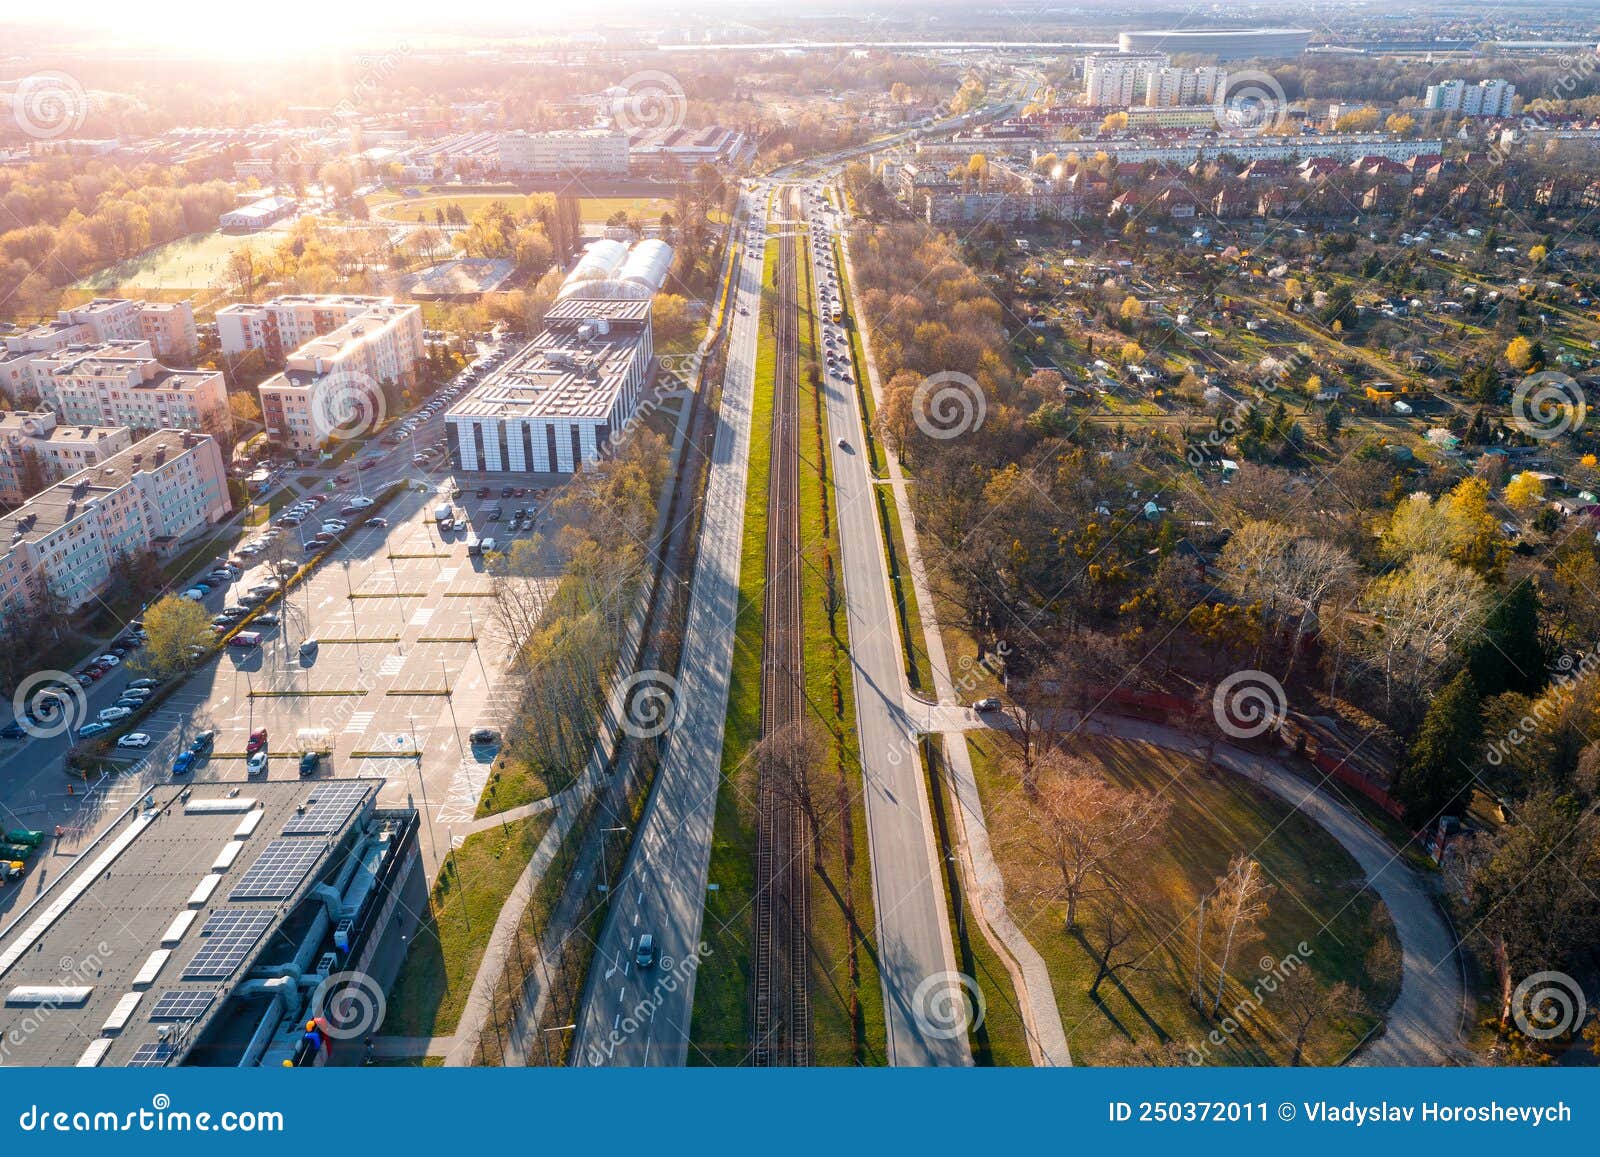 aerial view of city traffic, trams and cars in wroclaw city, poland